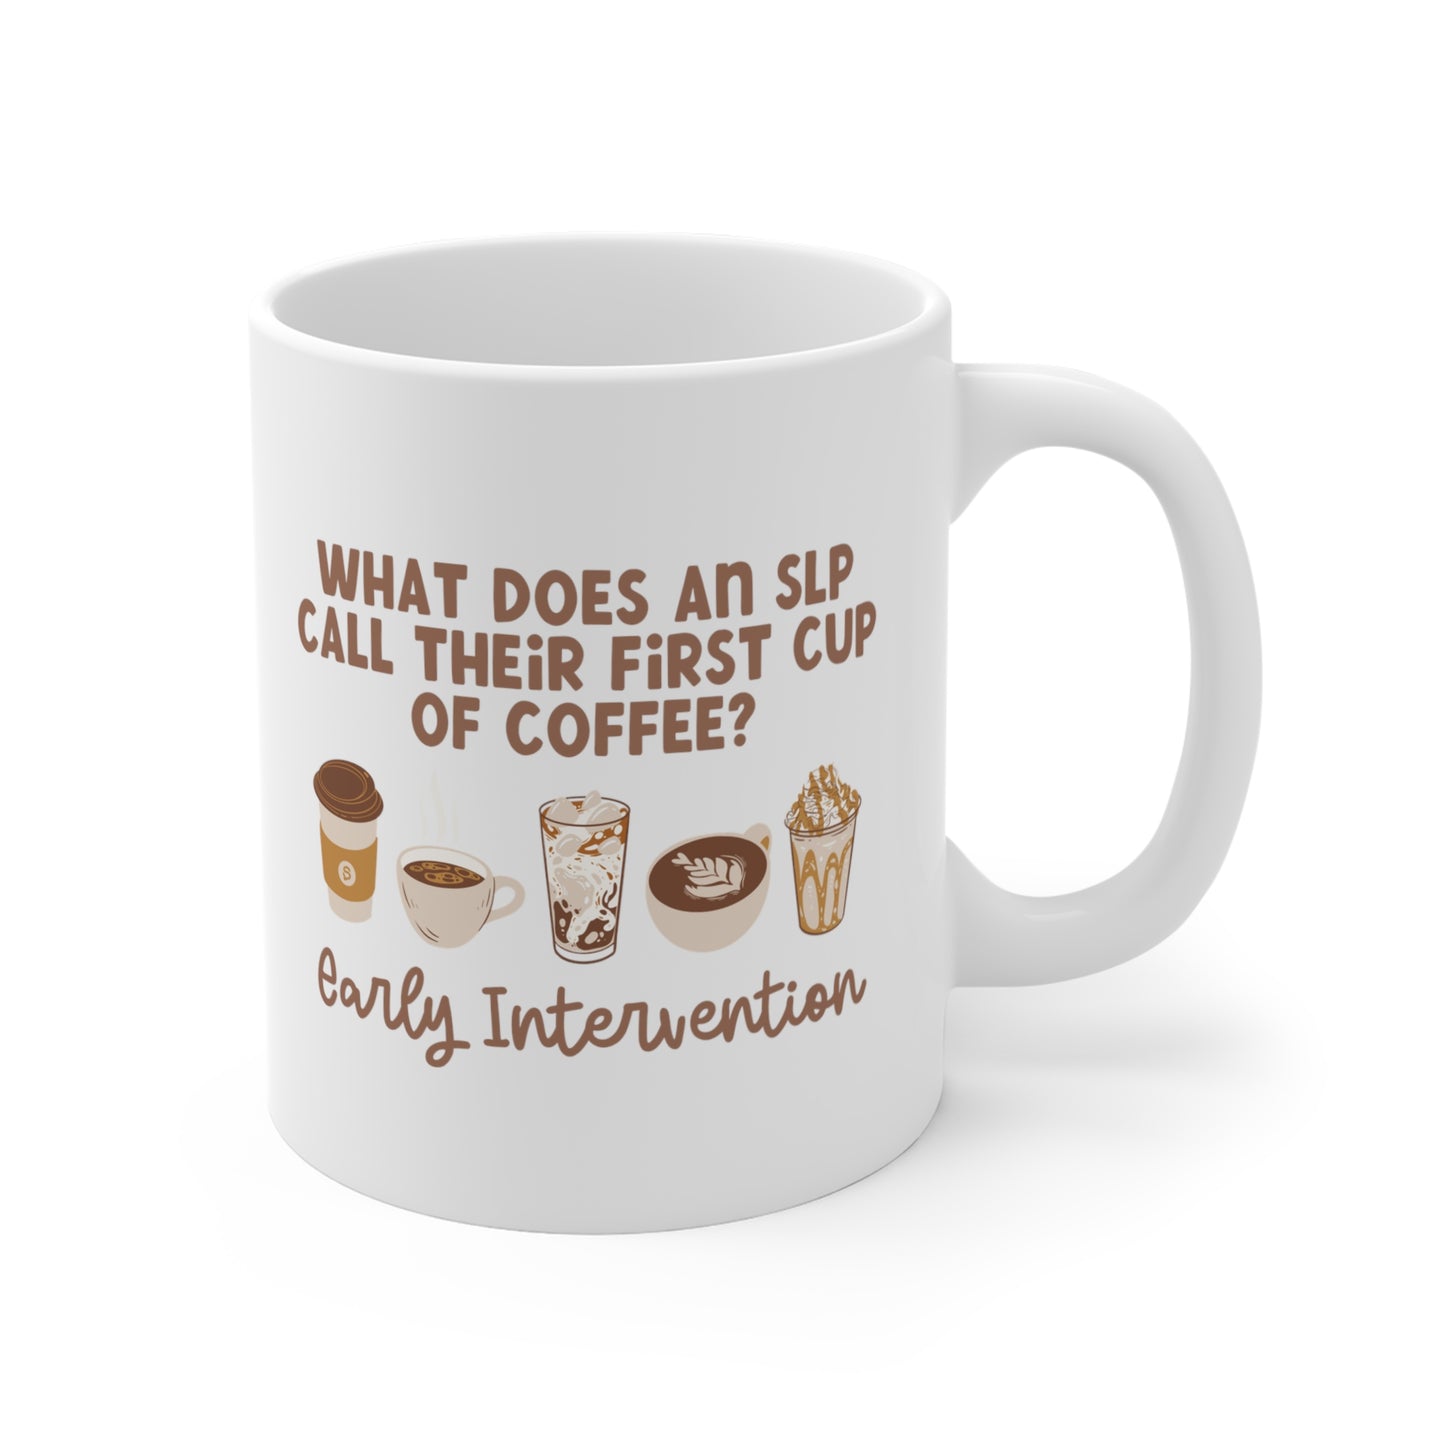 What Does An SLP Call Their First Cup of Coffee Mug